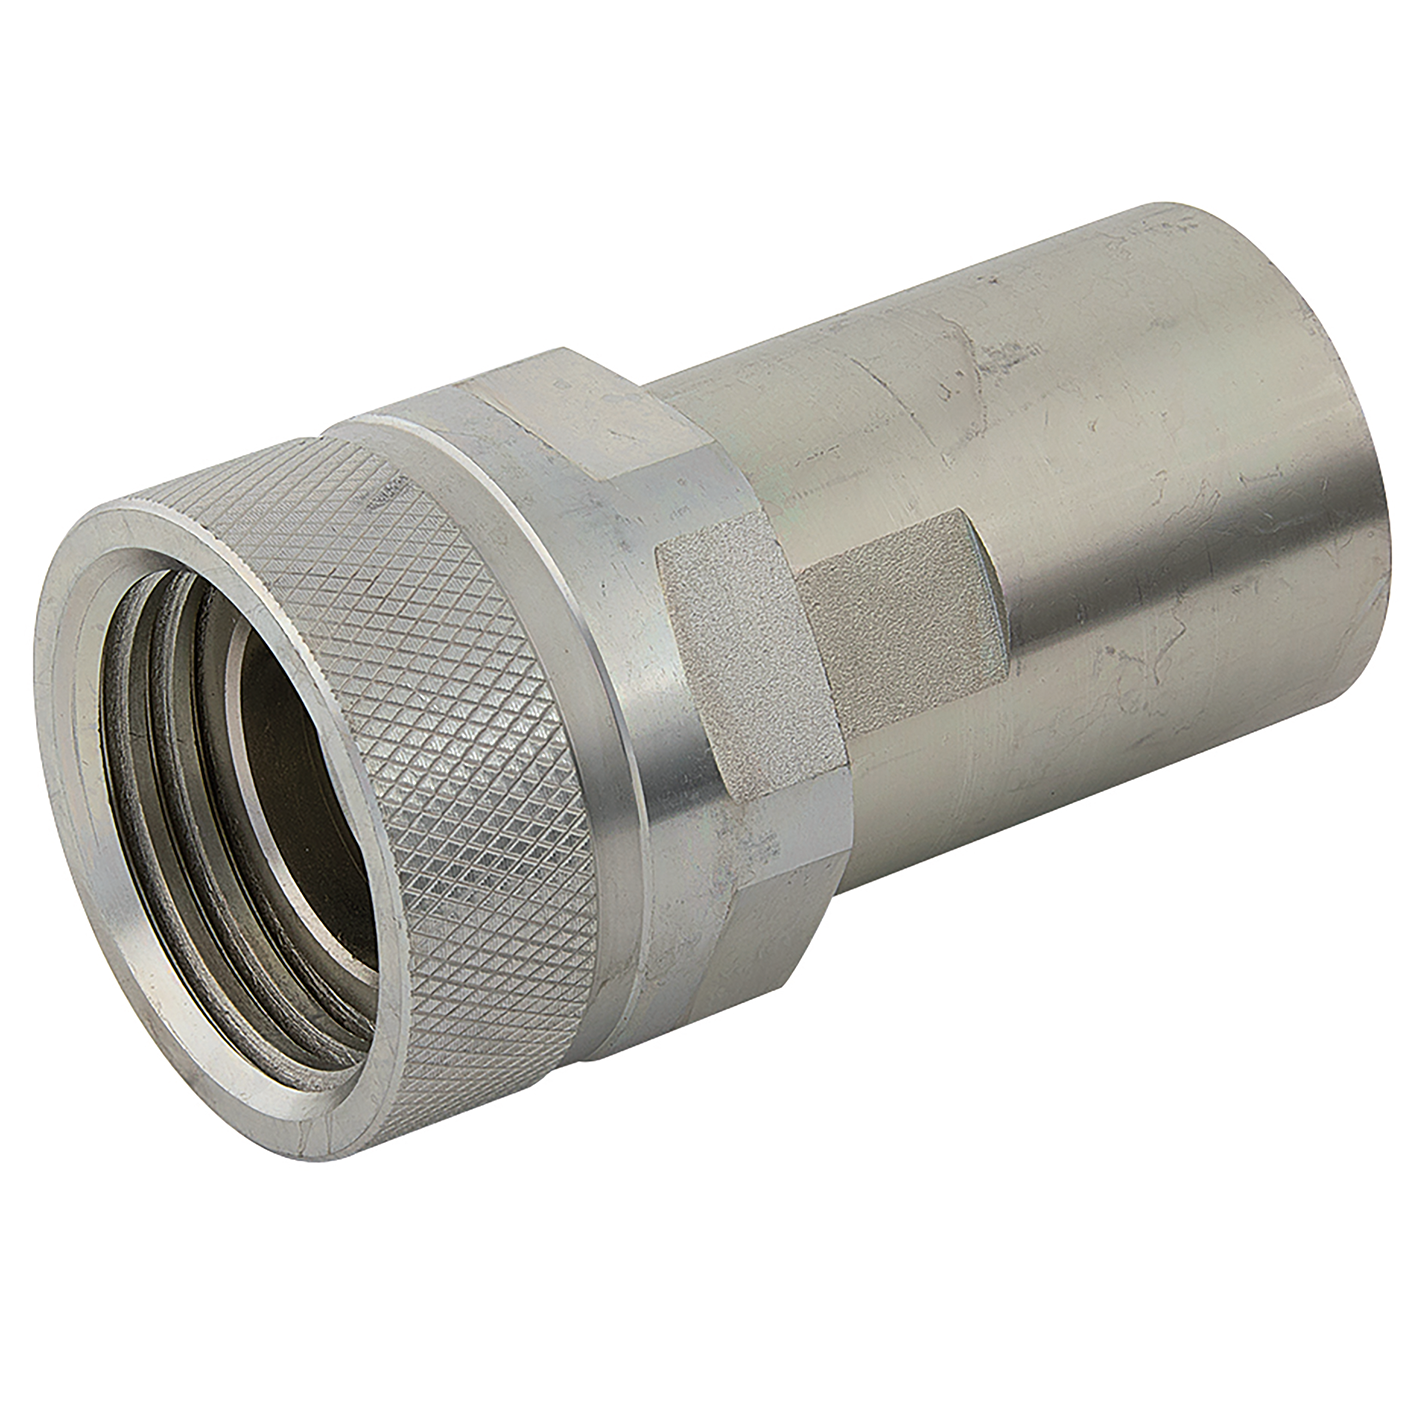 1/2" BSPP Female Hydraulic Quick Release Coupling